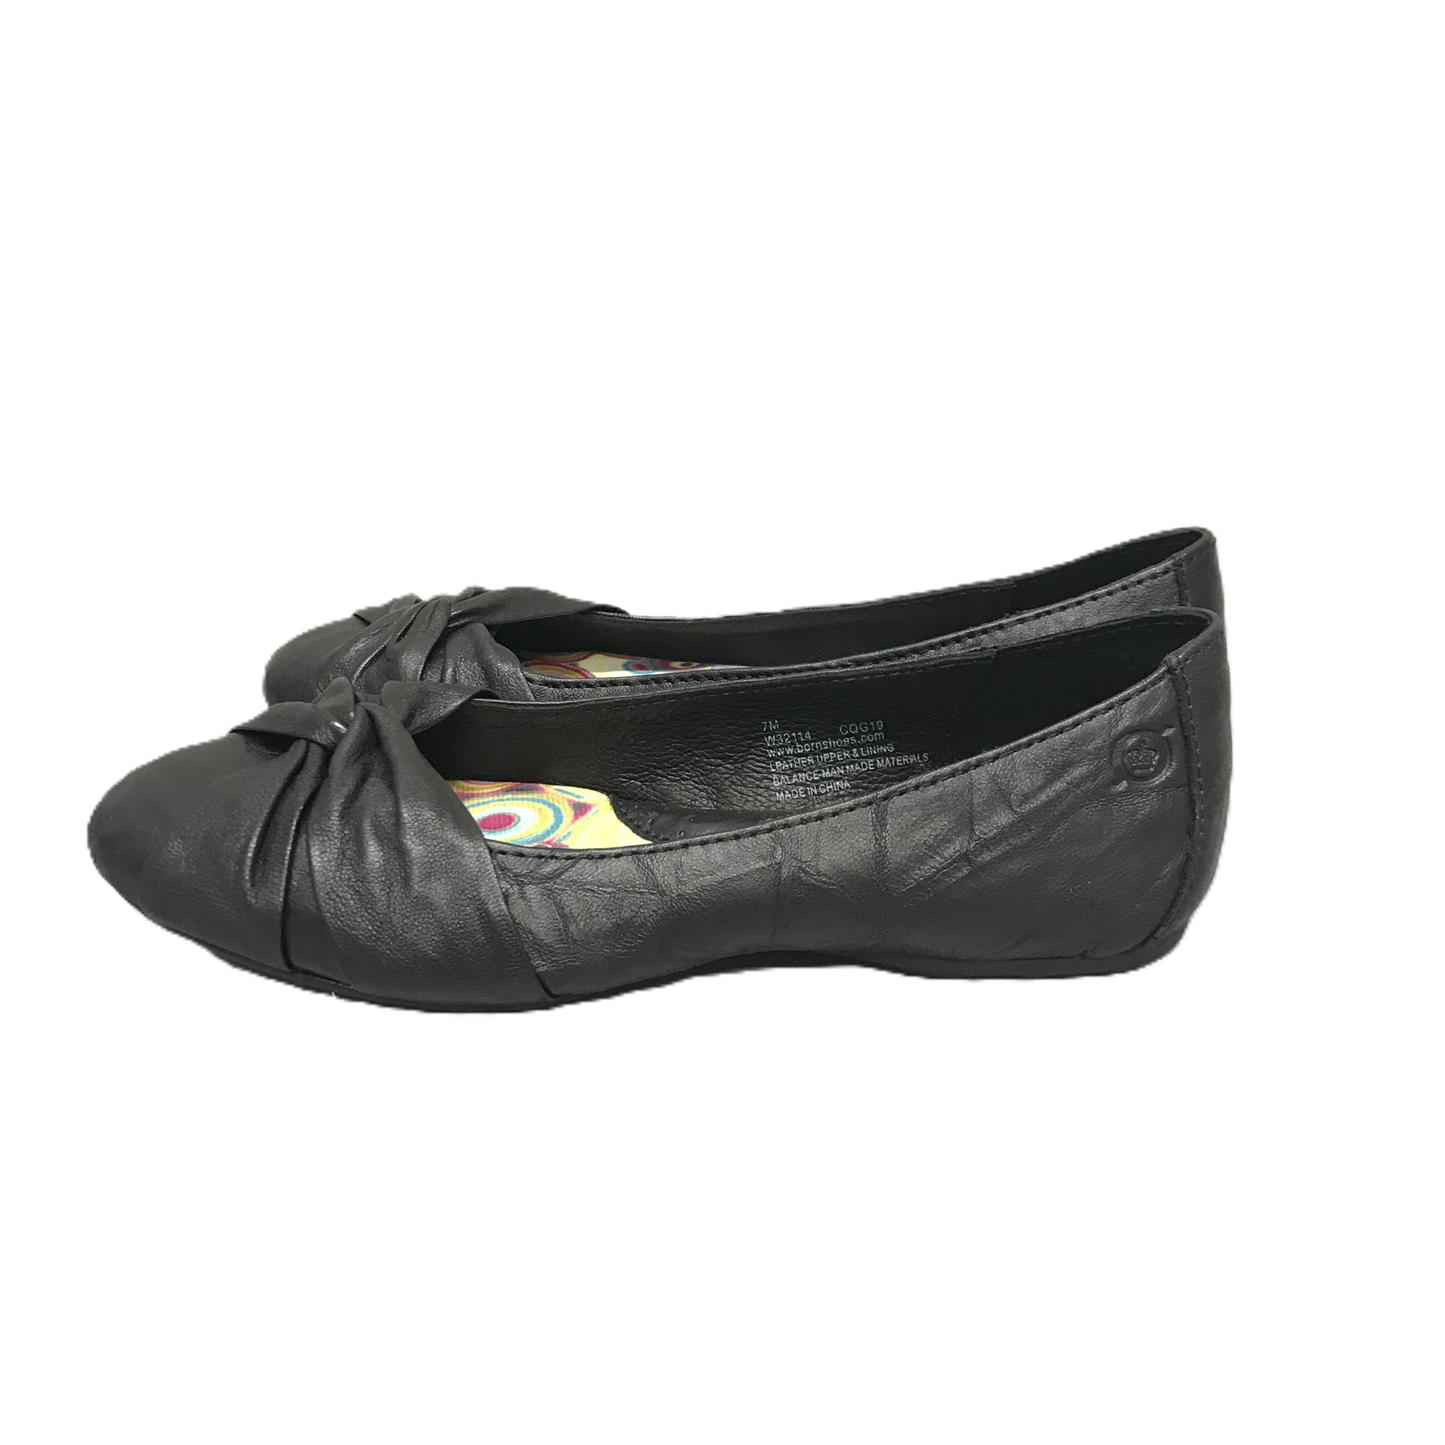 Black Shoes Flats By Born, Size: 7